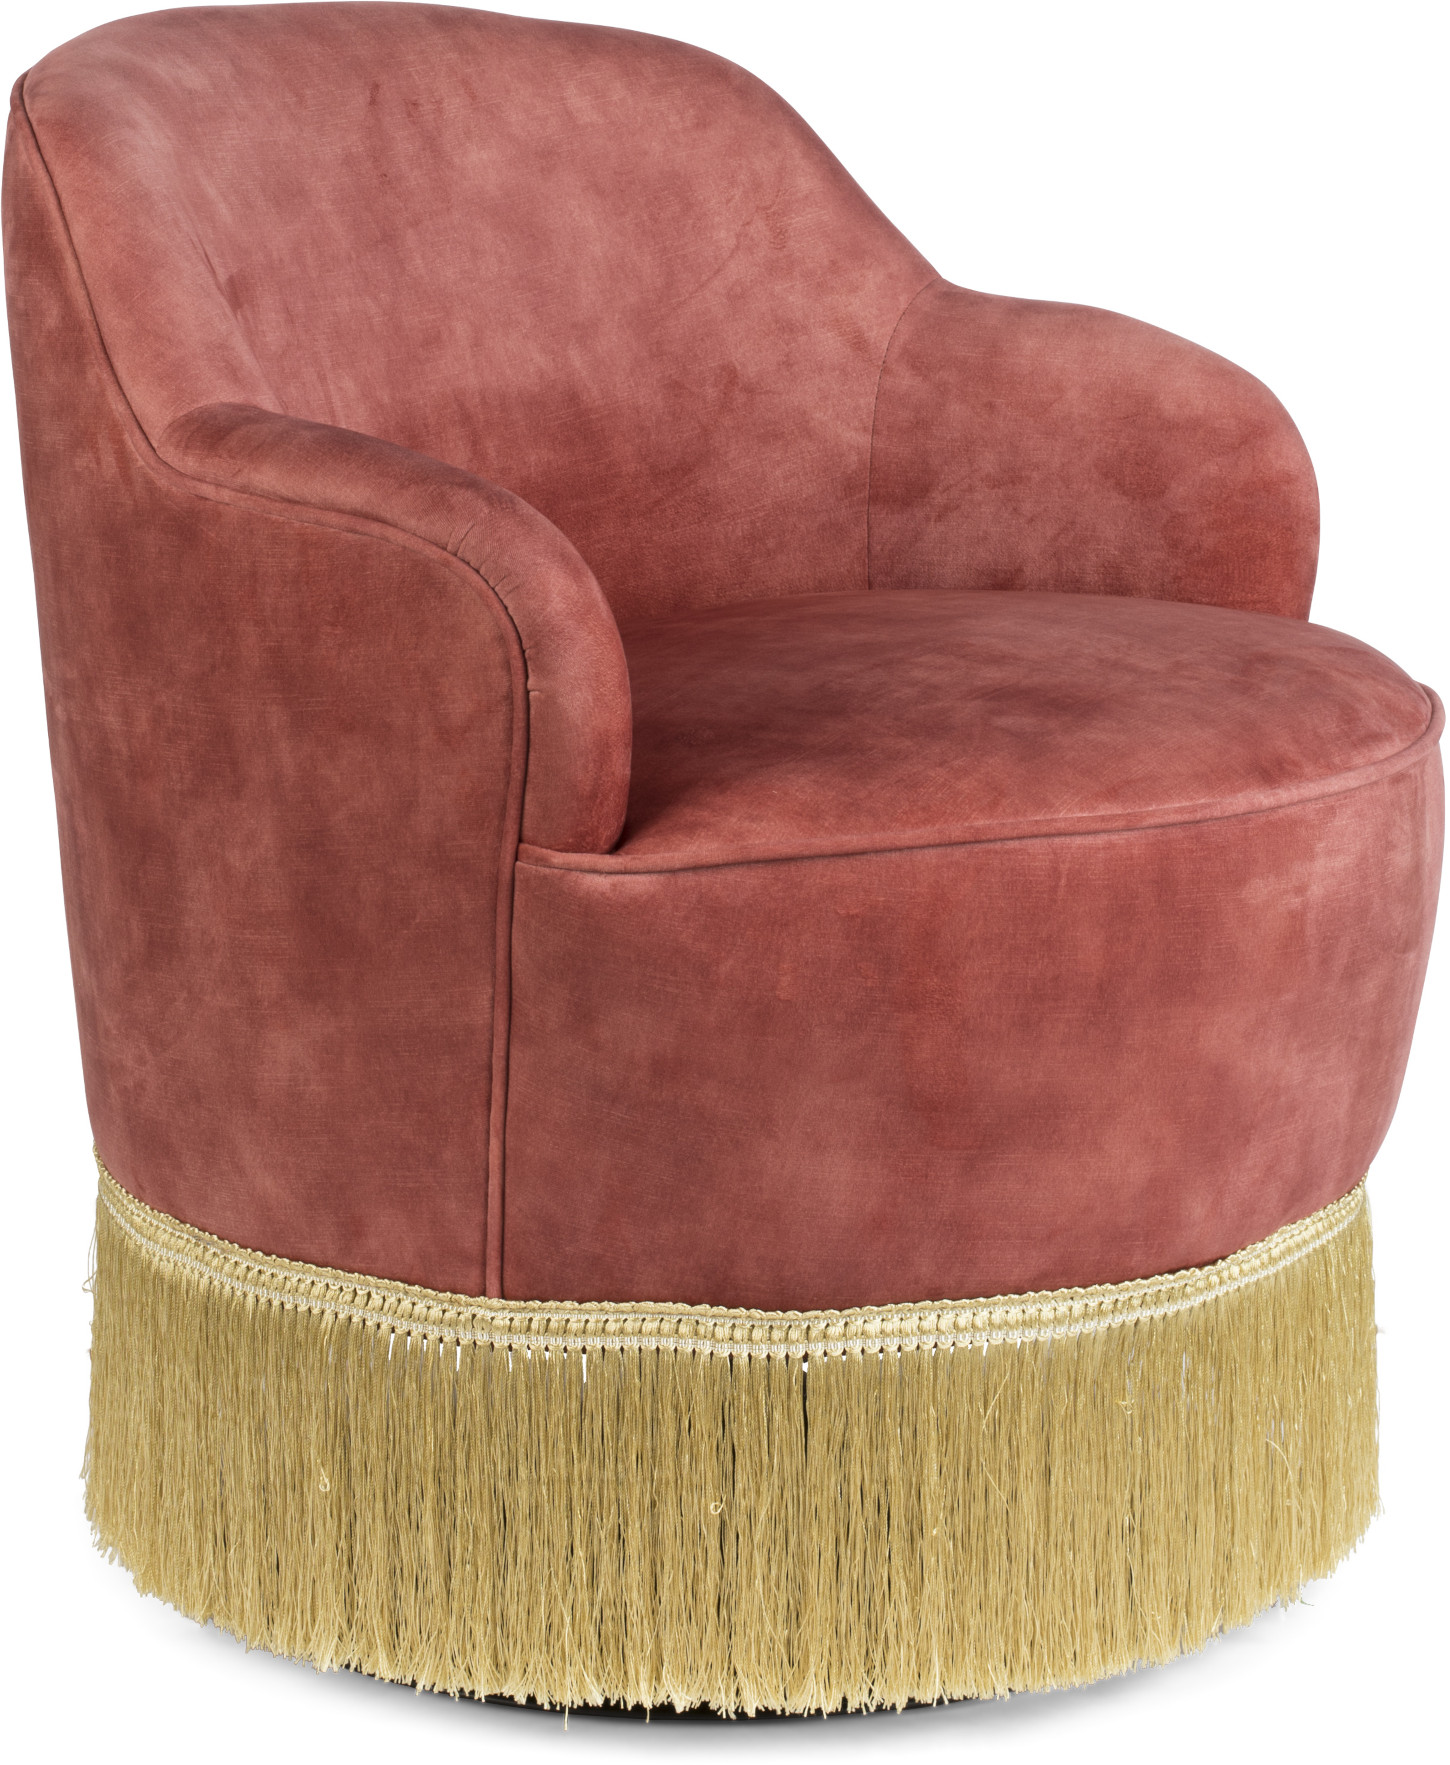 Fringe Me Up Fauteuil Old Pink Bold Monkey Fauteuil ZVRBM31024